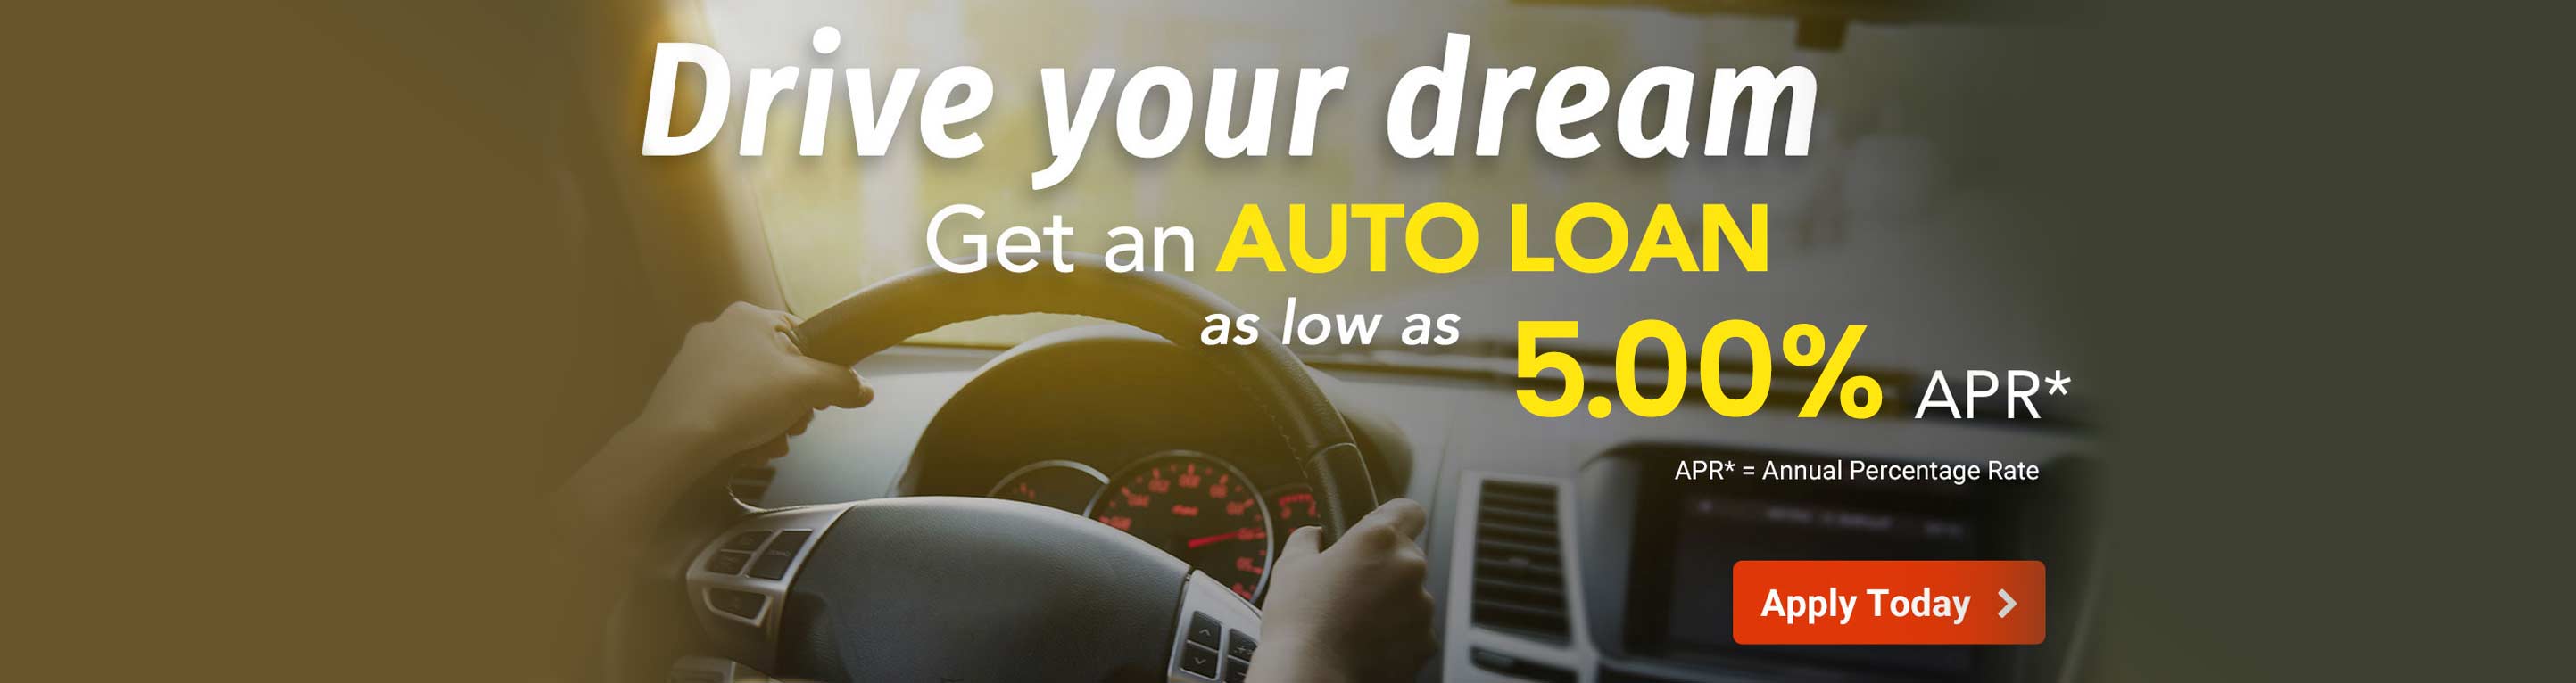 Drive Your Dream. Get an auto loan as low as 5.00% APR APR - Annual Percentage Rate. Apply Now.